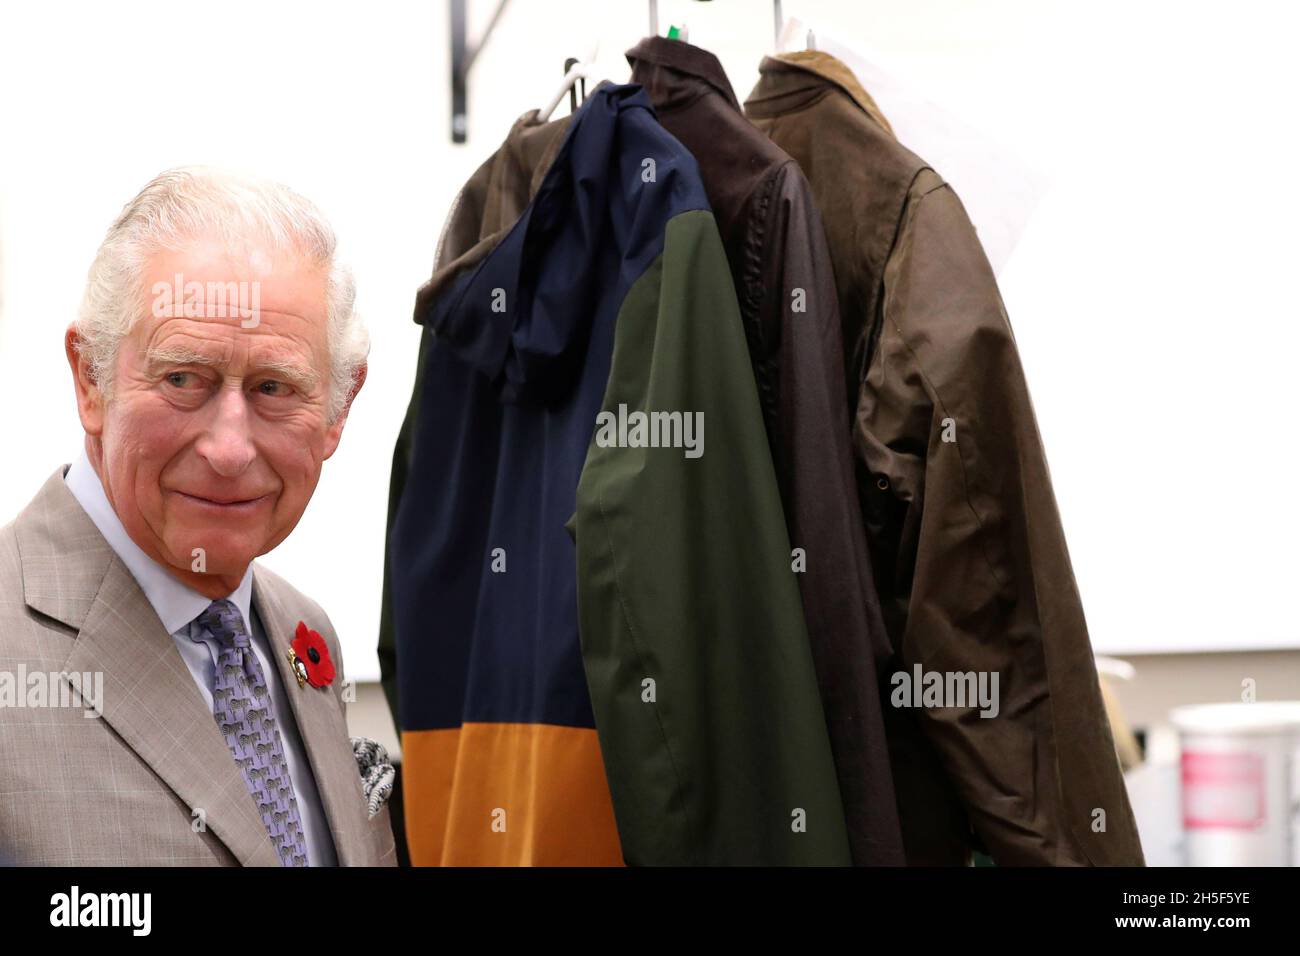 Britain's Prince Charles walks past jackets during a visit to Royal Warrant  Holder, J Barbour And Sons Ltd, in South Shields, Britain November 9, 2021.  Scott Heppell/Pool via REUTERS Stock Photo - Alamy